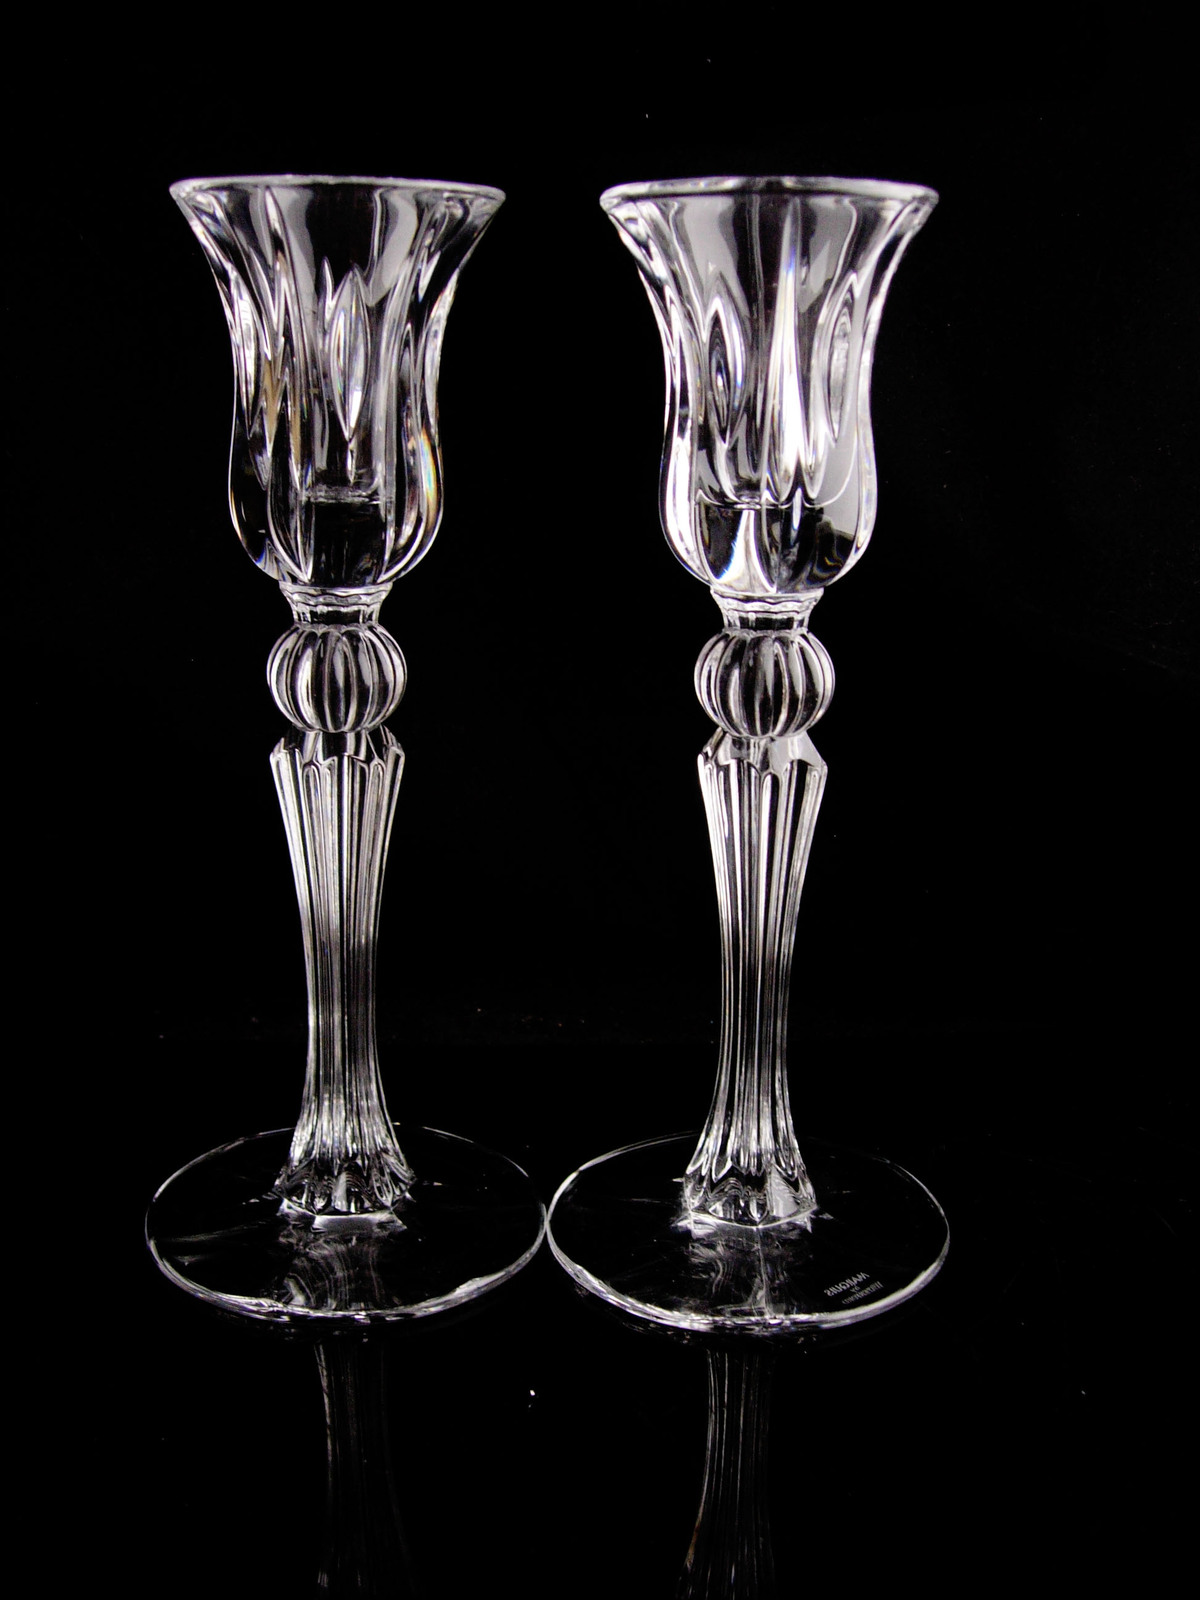 Primary image for Vintage crystal Waterford Candlesticks - Irish crystal candleholders - wedding a